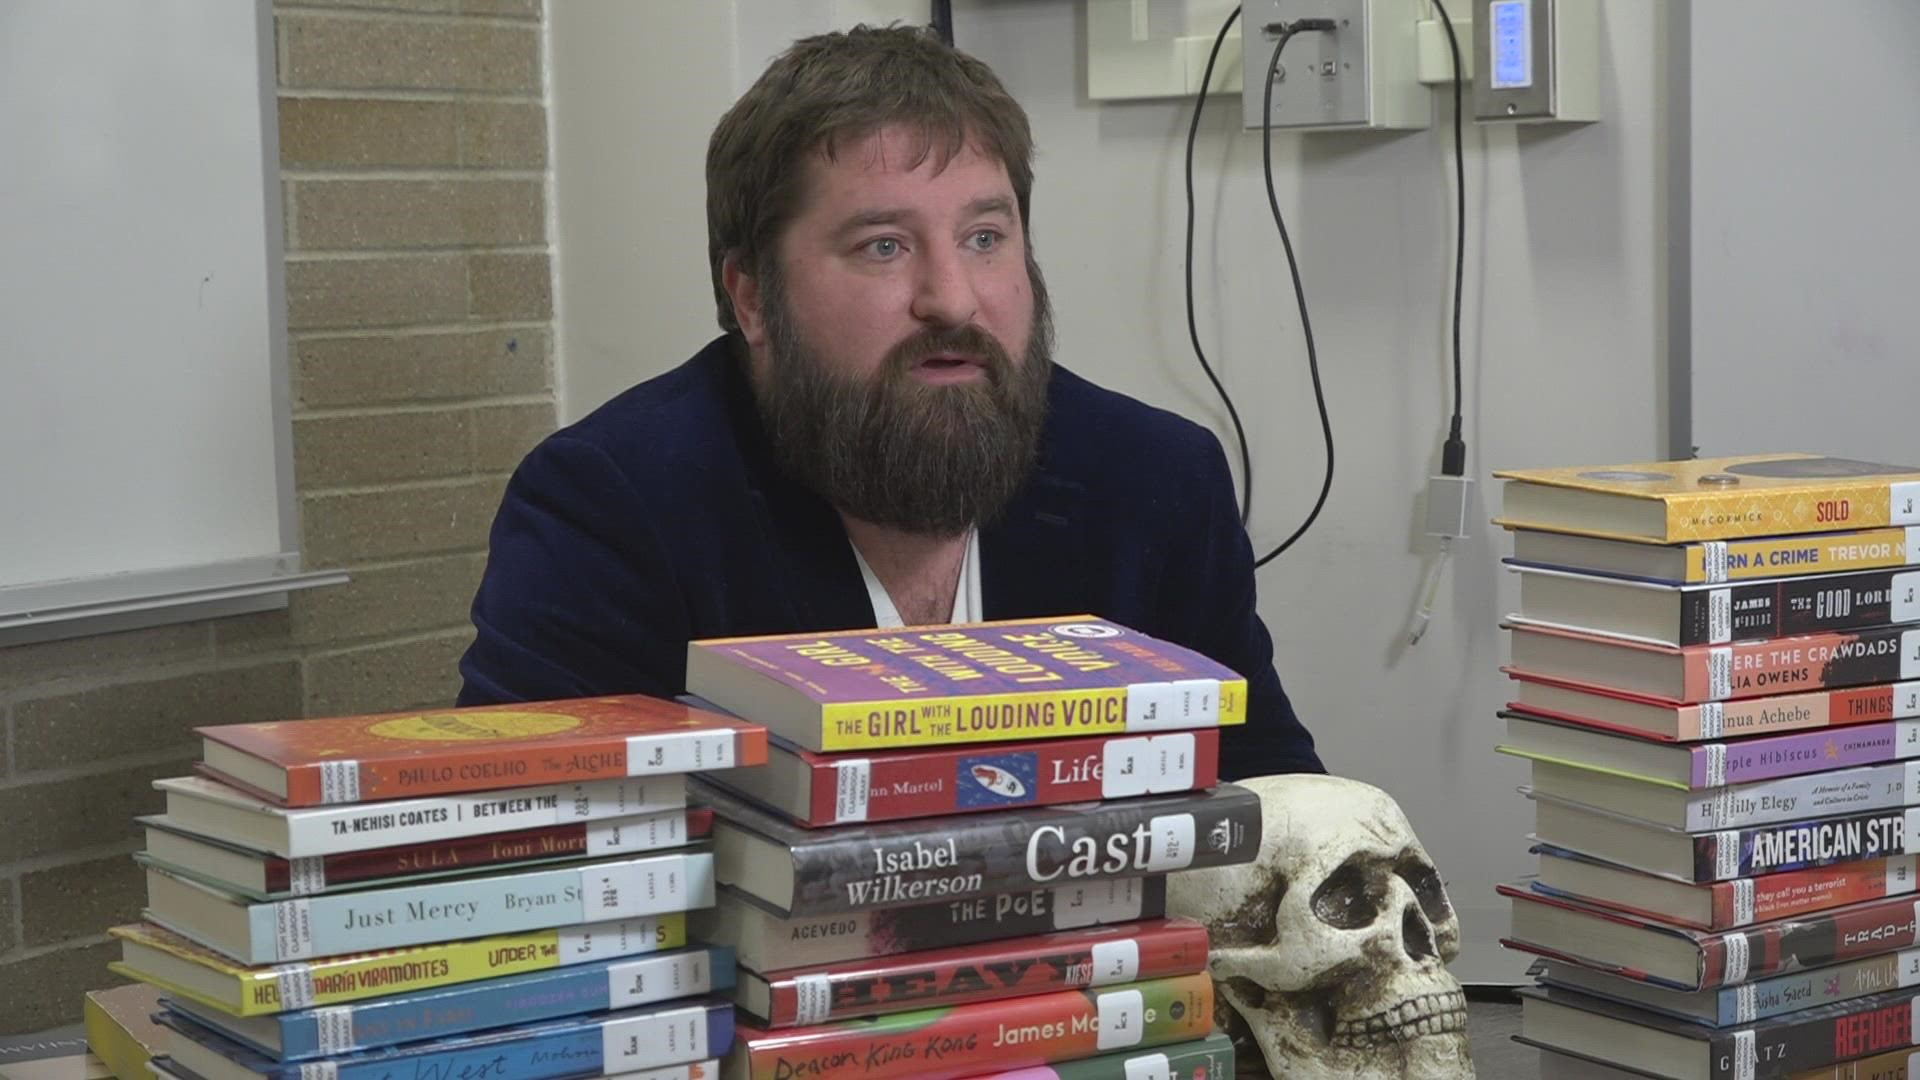 Matt Harrison has been buying books with a wide range of authors and subject matter. However, the library is not complete.